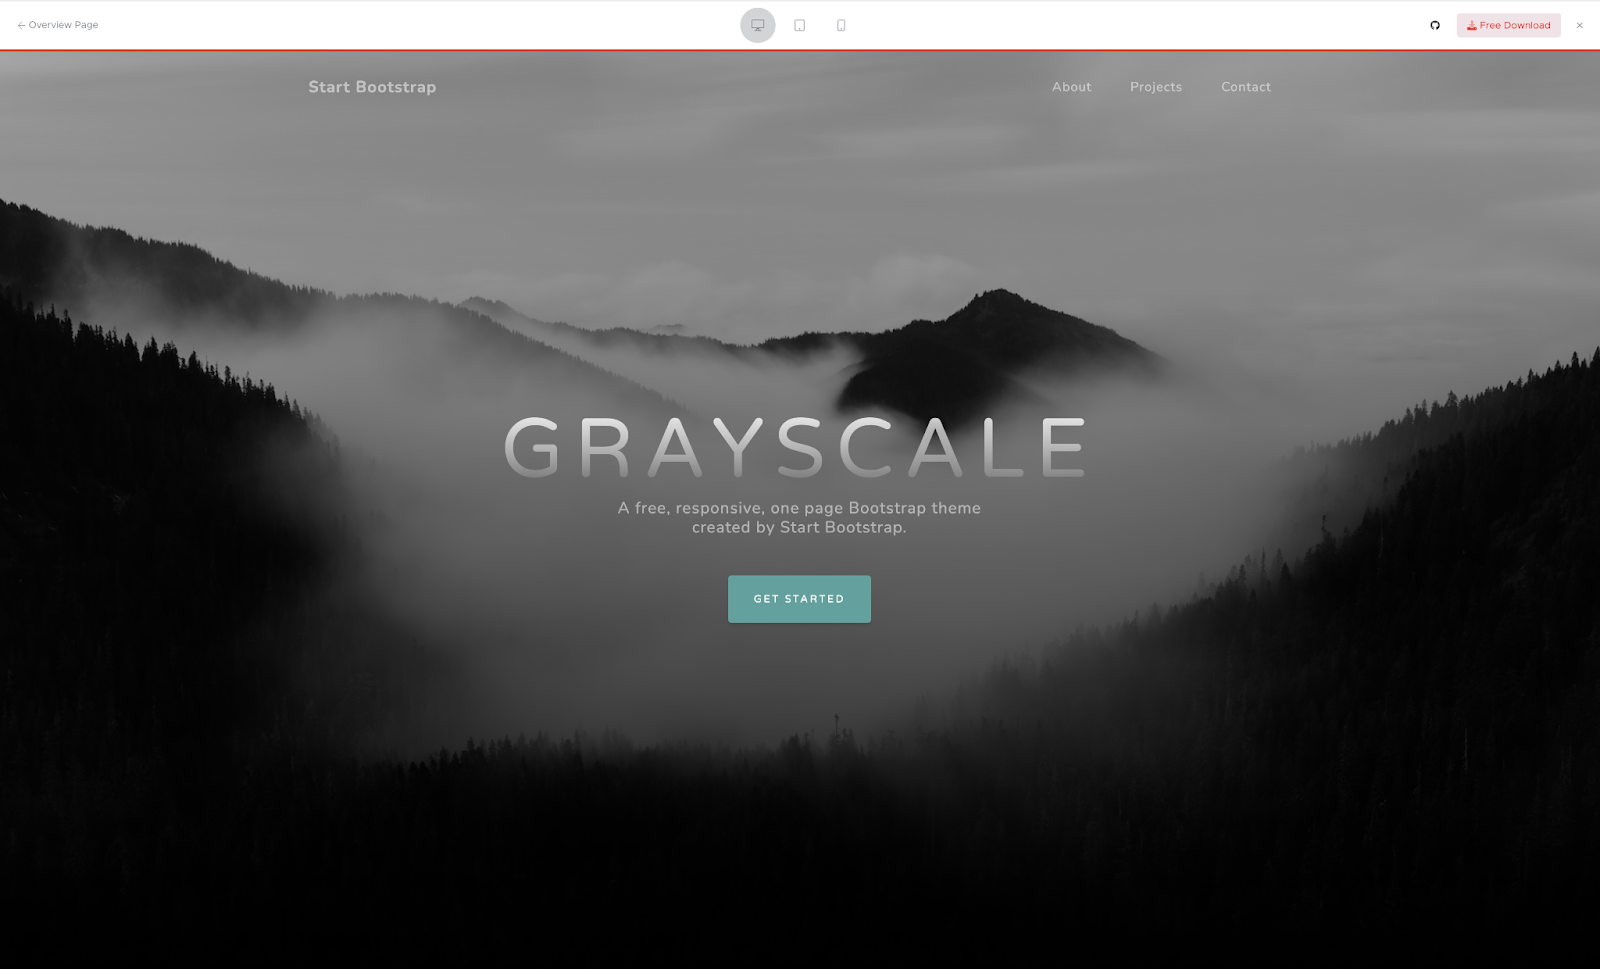 Grayscale is a photography-focused responsive Website template you can use for your Website